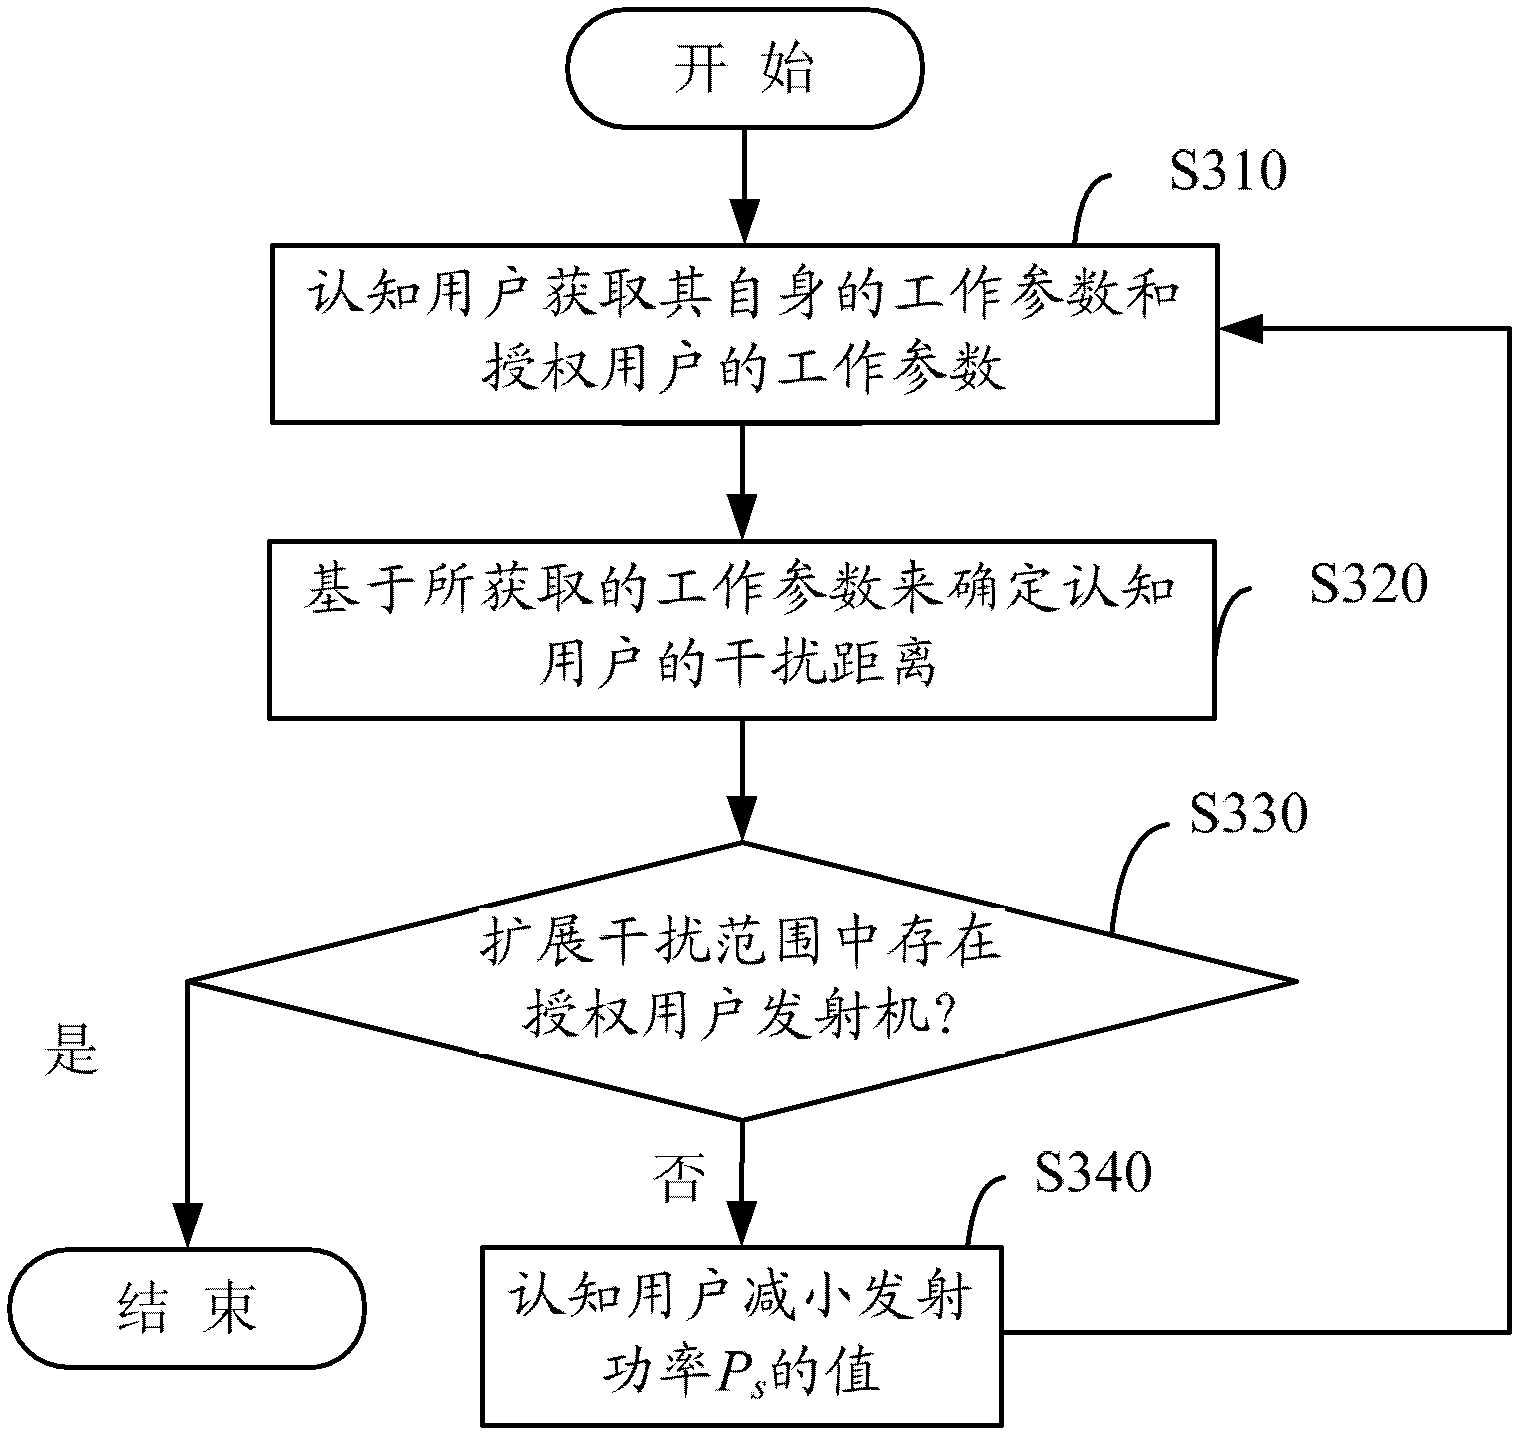 Interference measurement and interference avoidance method based on cognitive radio technology